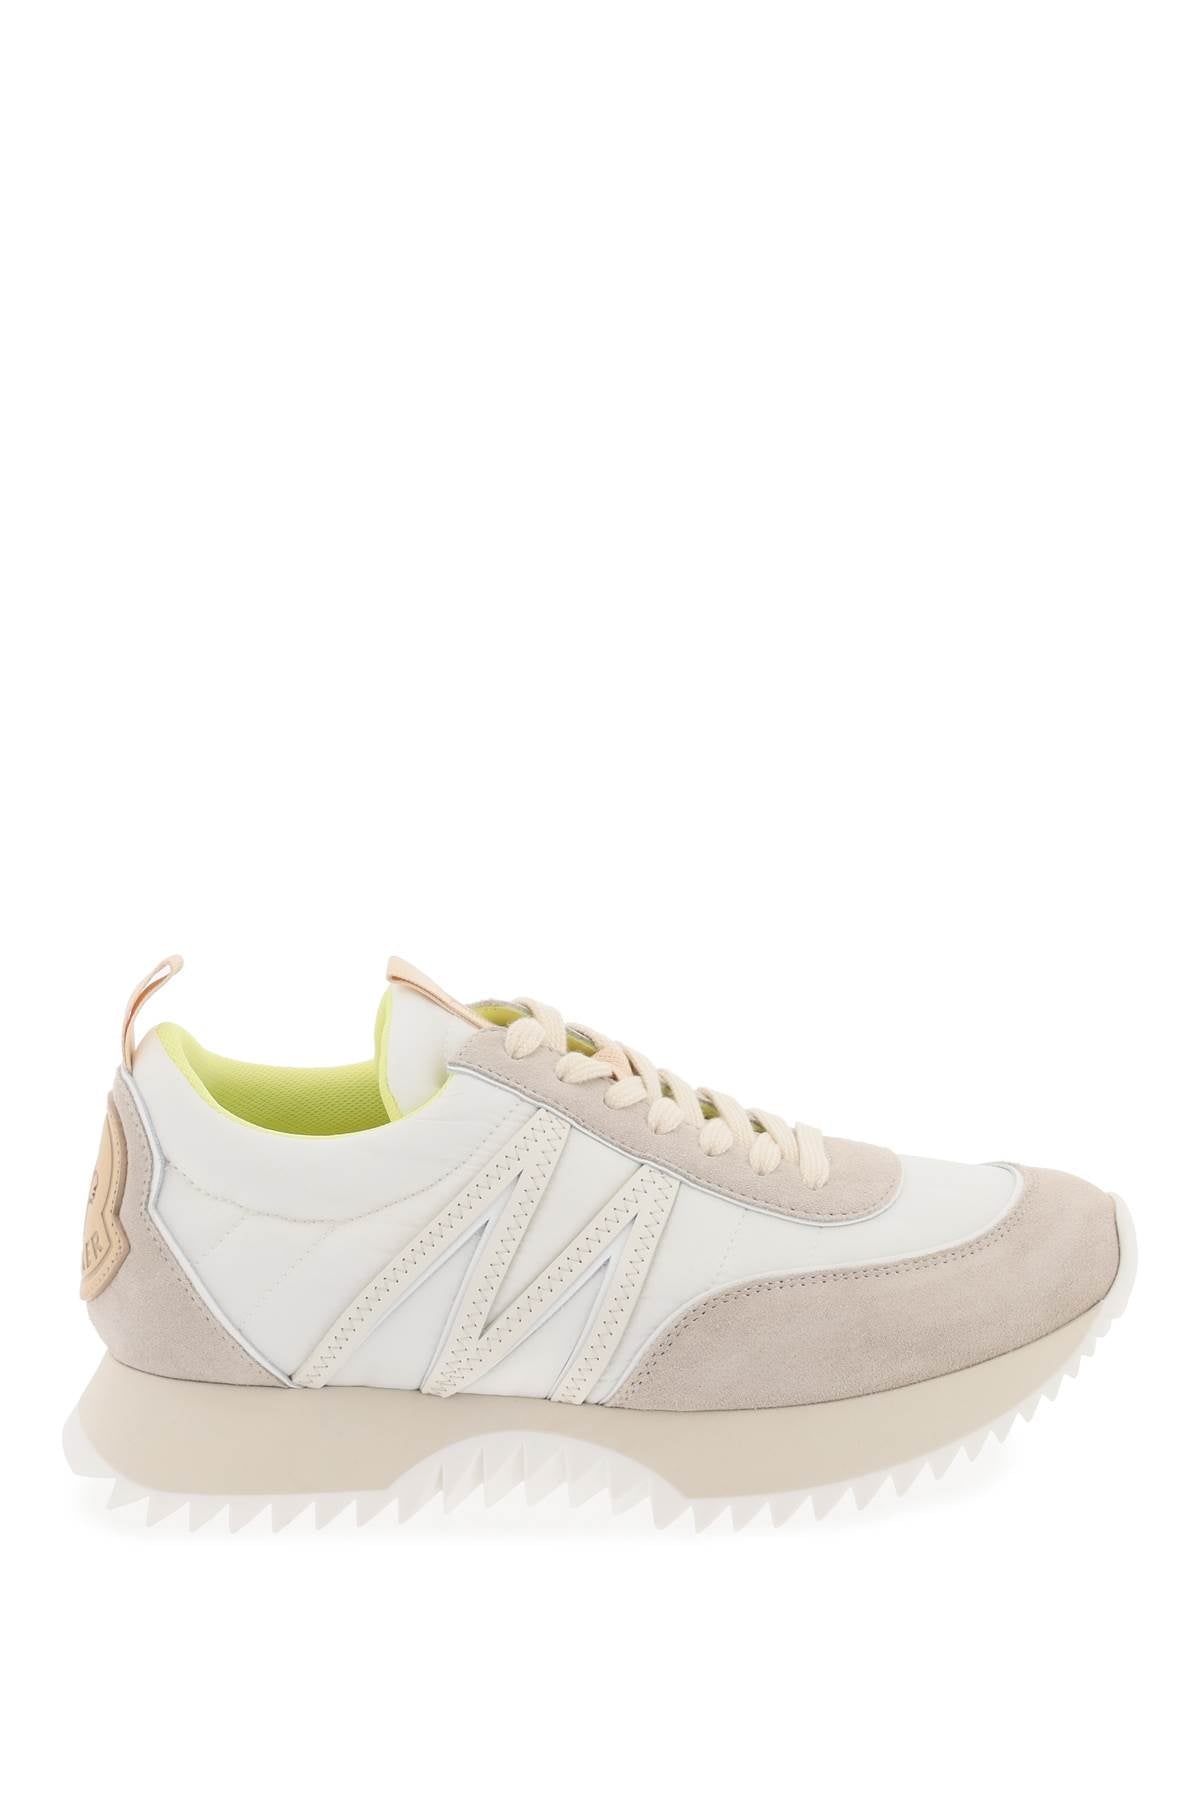 Moncler Basic Pacey Sneakers In Nylon And Suede Leather. Women - 1